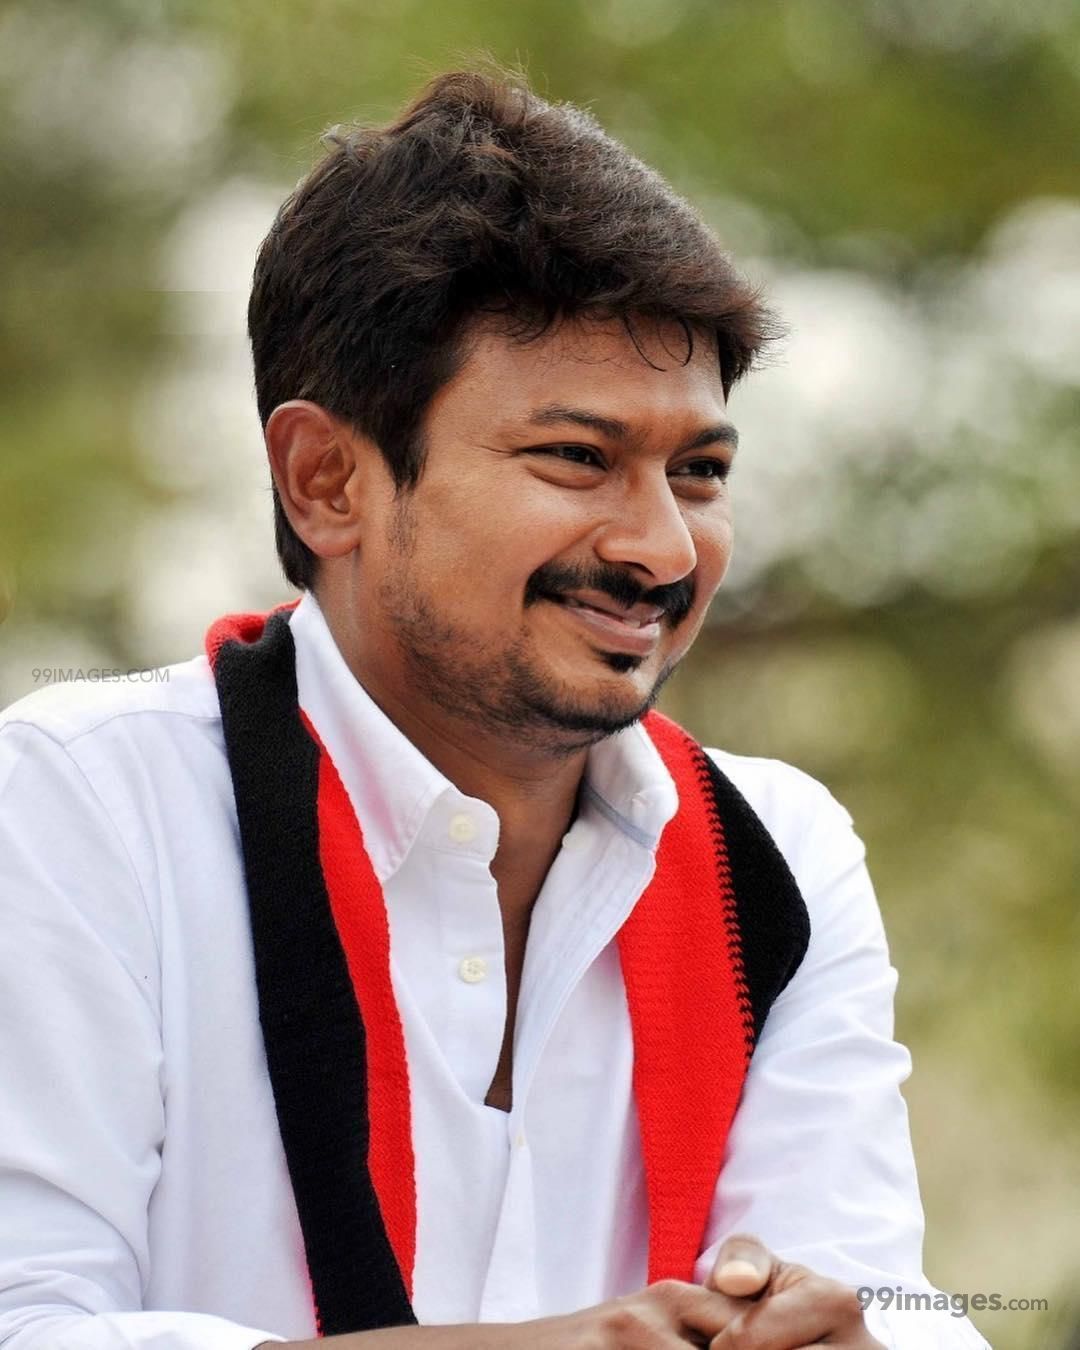 Udhayanidhi Stalin HD Wallpaper (Desktop Background / Android / iPhone) (1080p, 4k) (1080x1350) (2020)